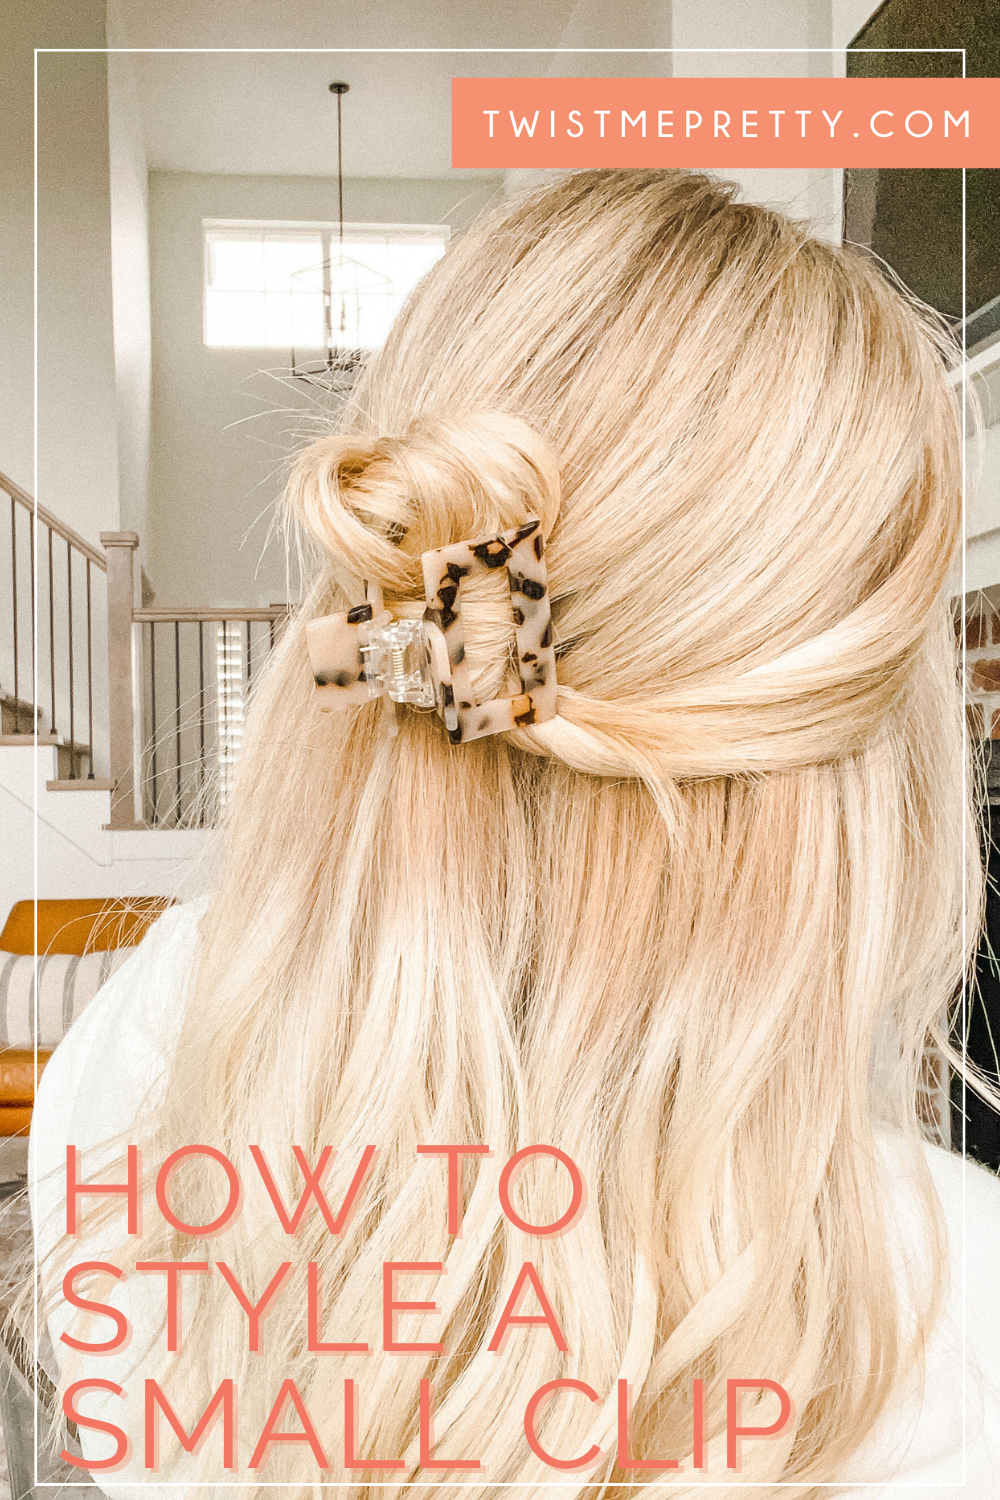 How to Style a Small Clip - Twist Me Pretty